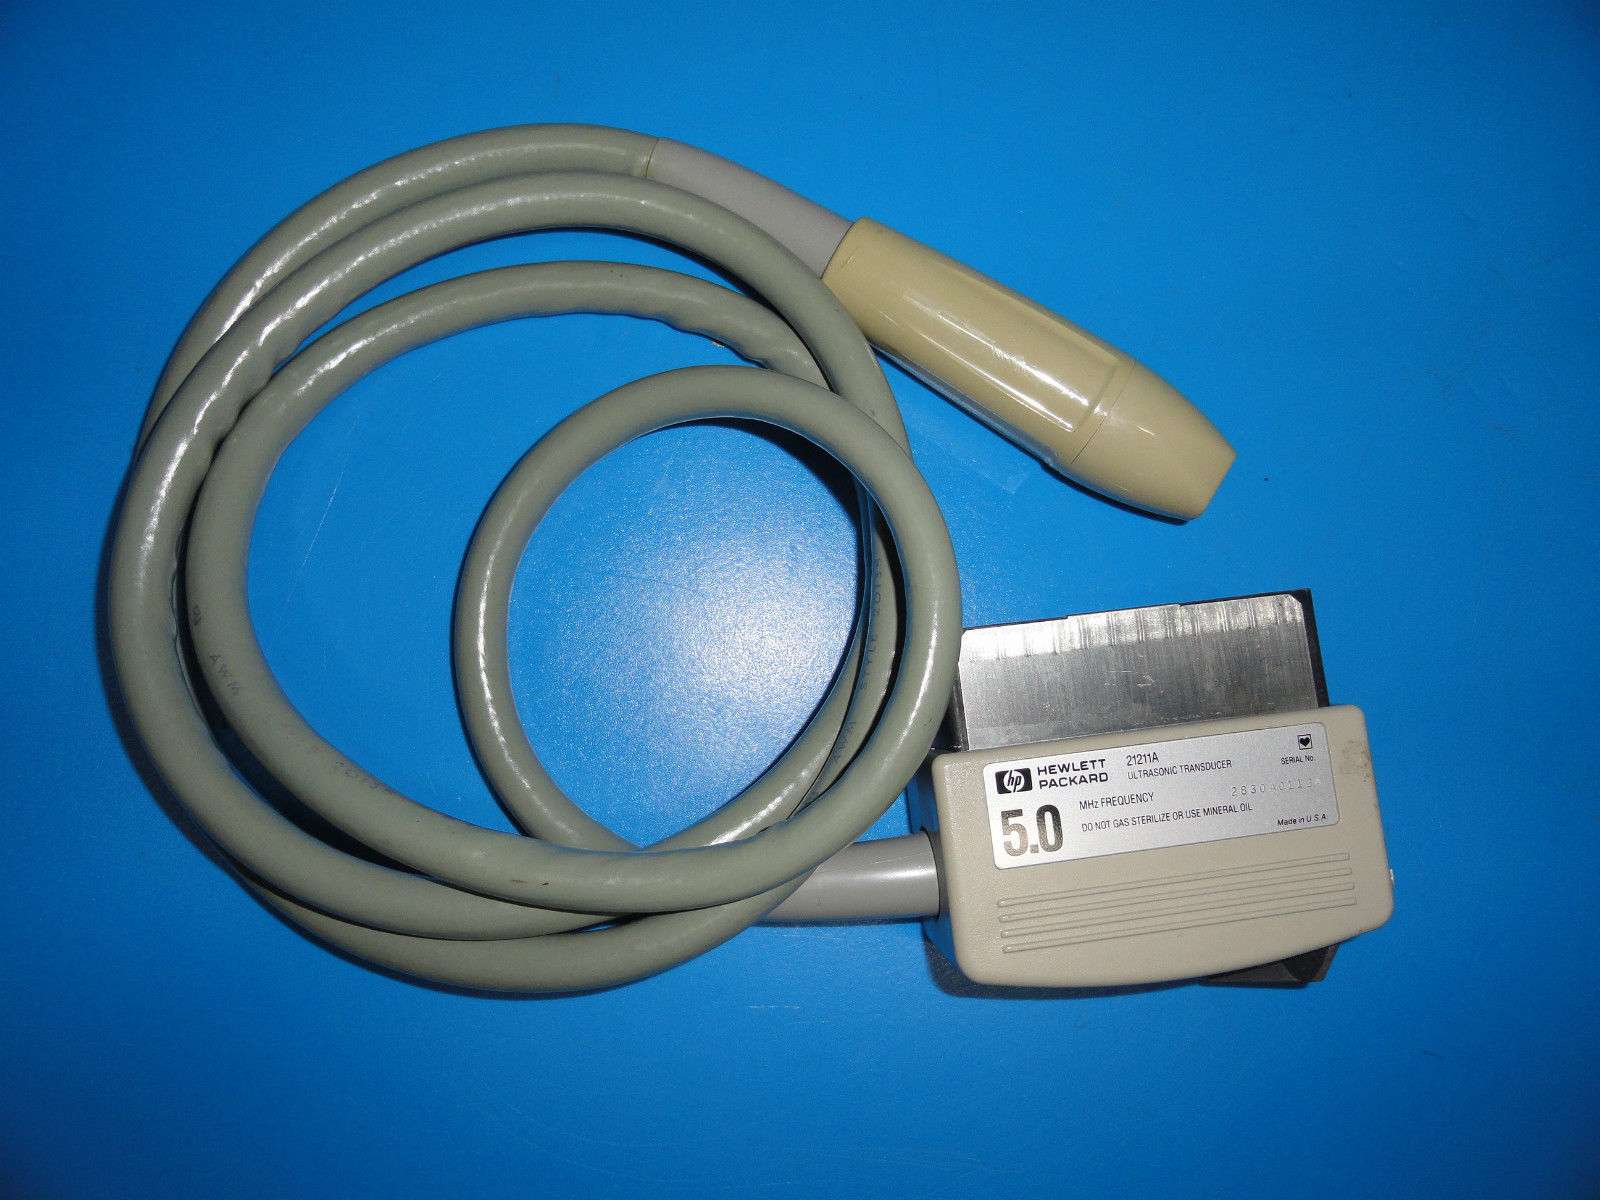 cable connected to a device on a blue surface